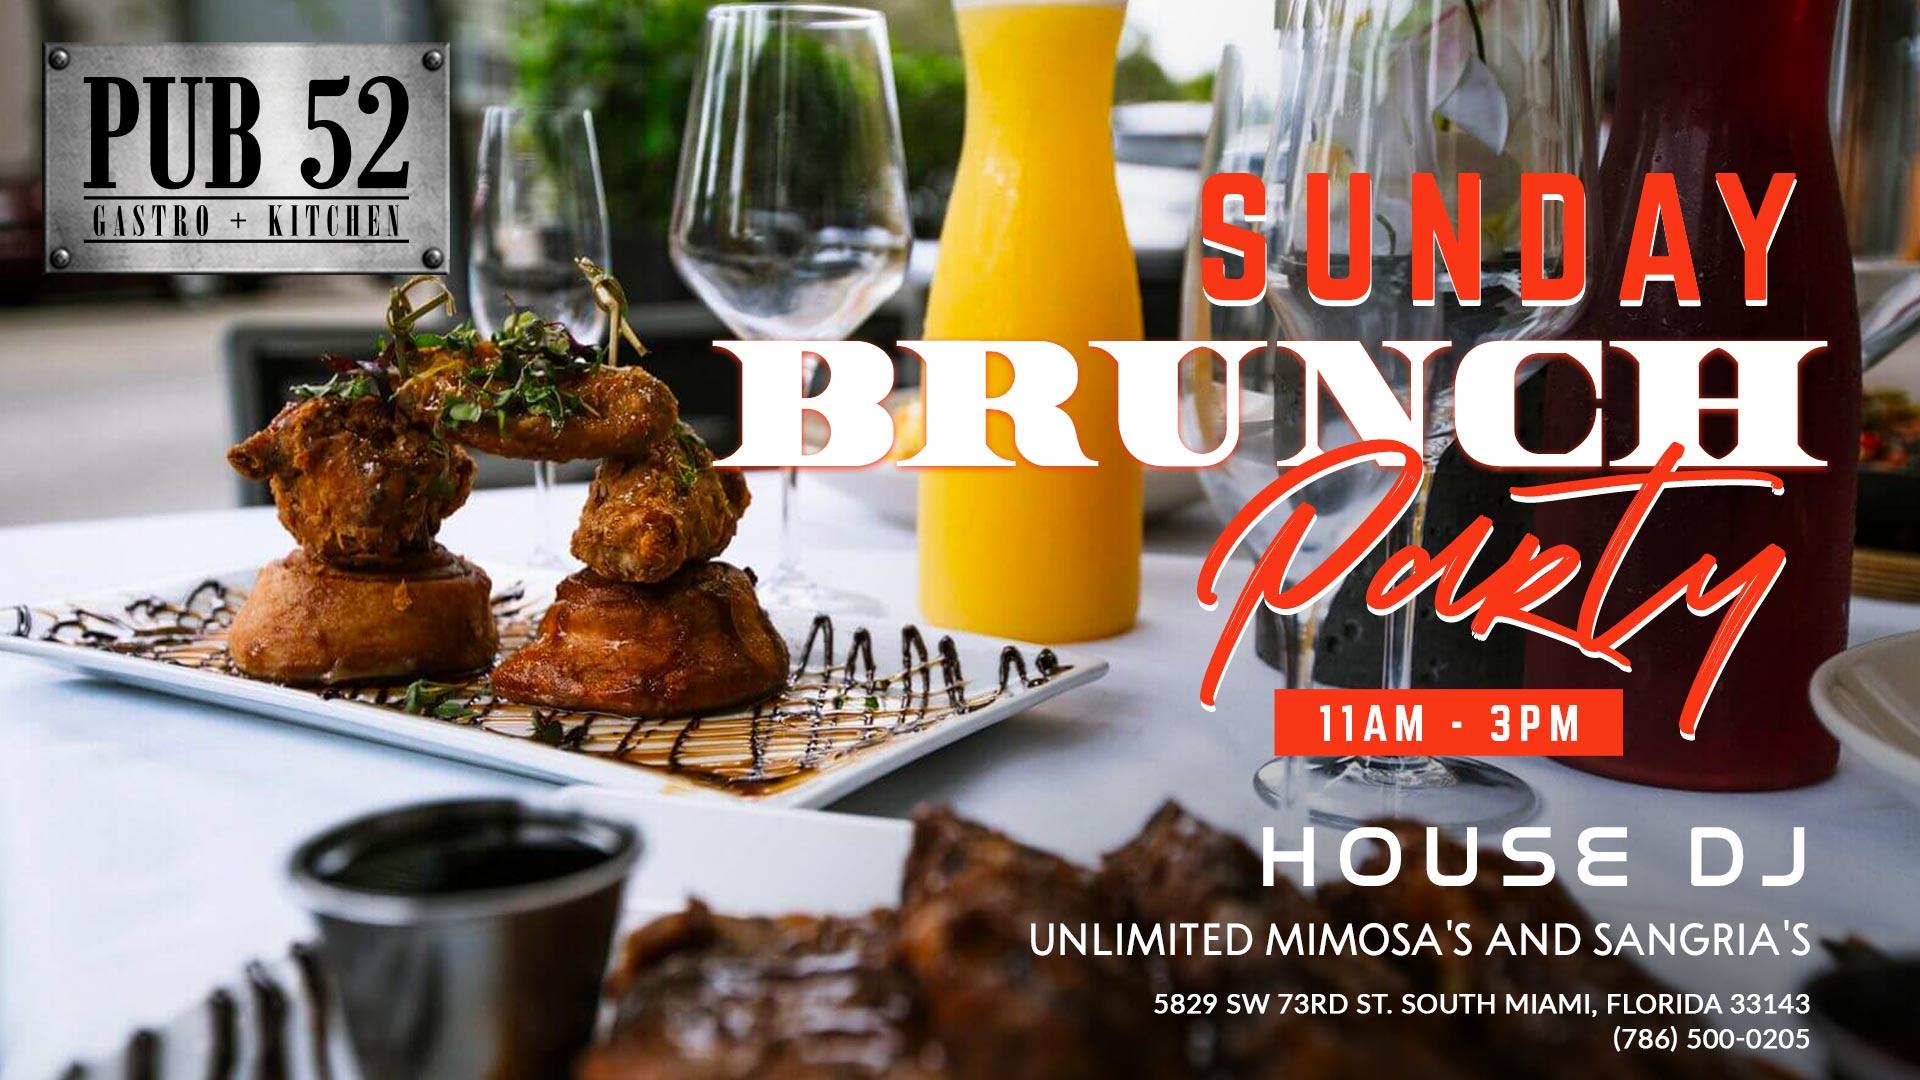 Sunday Brunch Party at Pub 52! Never a Cover